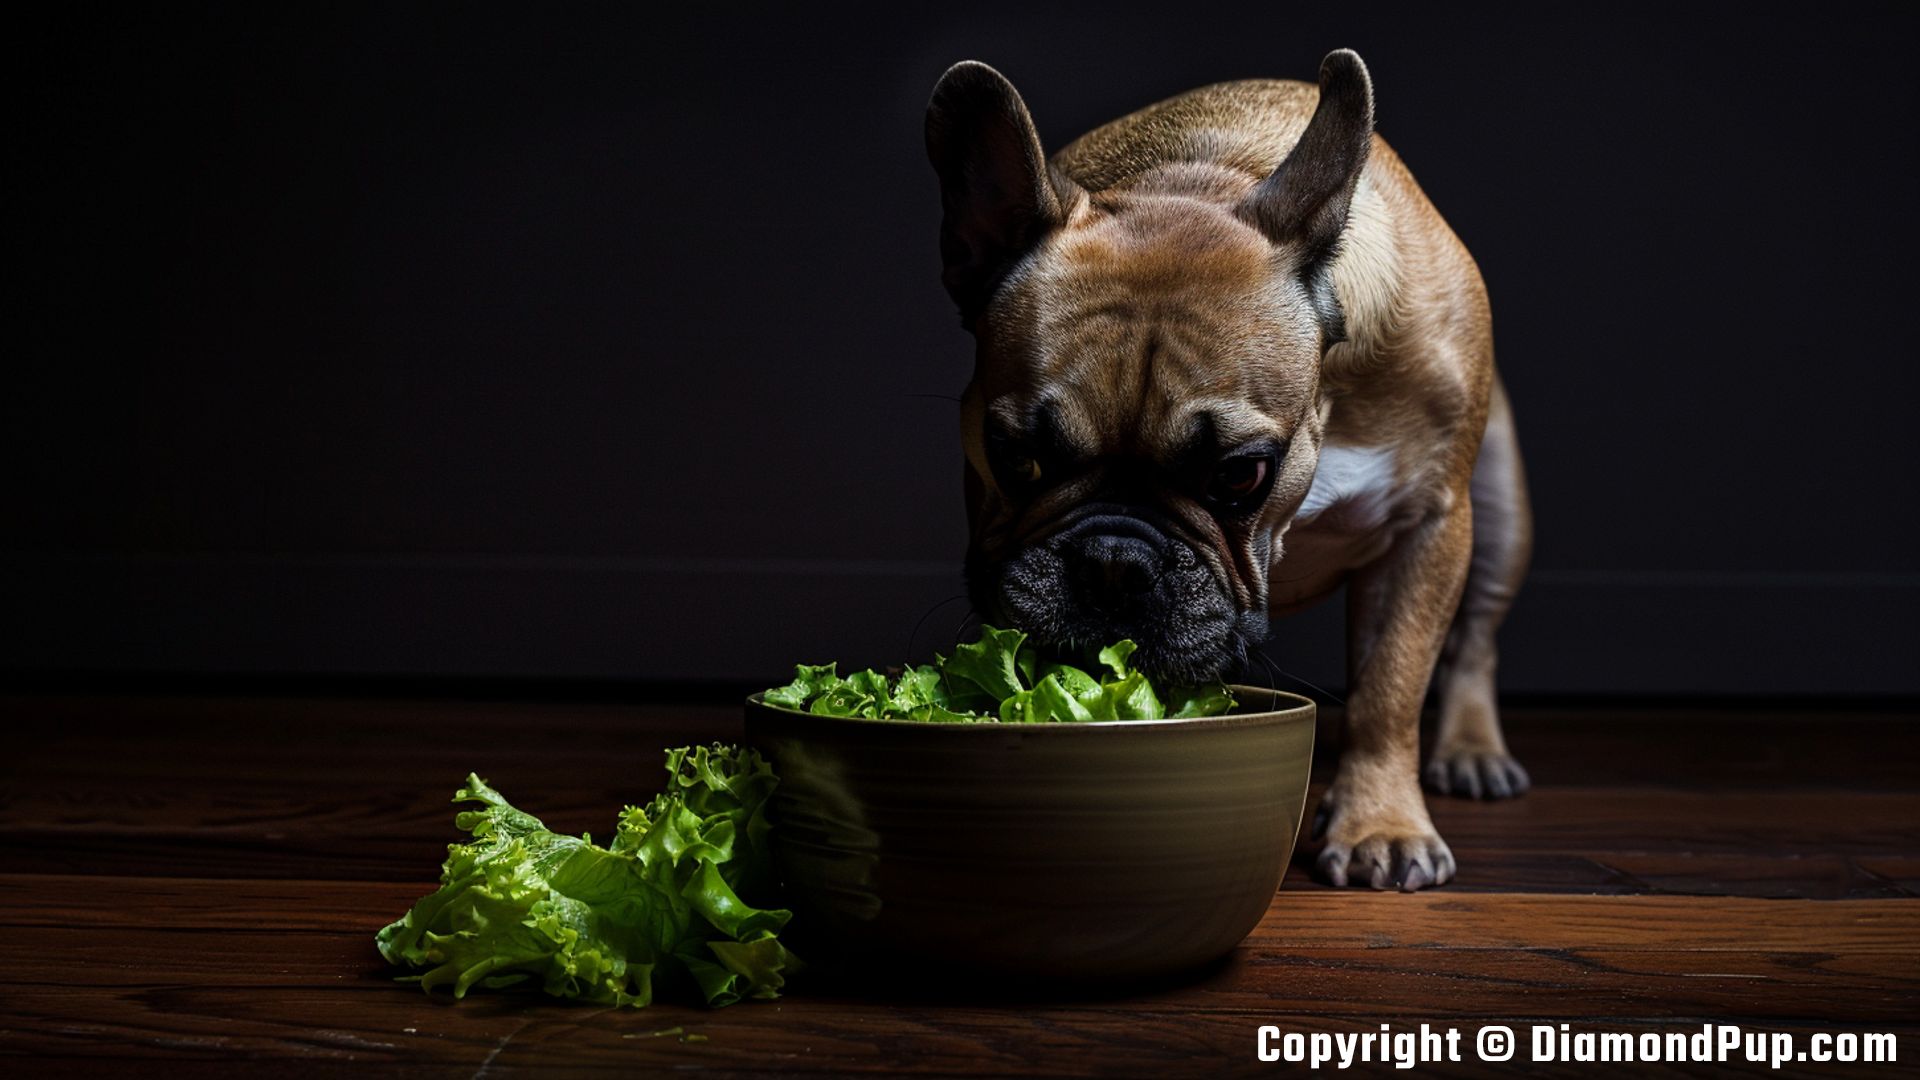 Photograph of French Bulldog Snacking on Lettuce